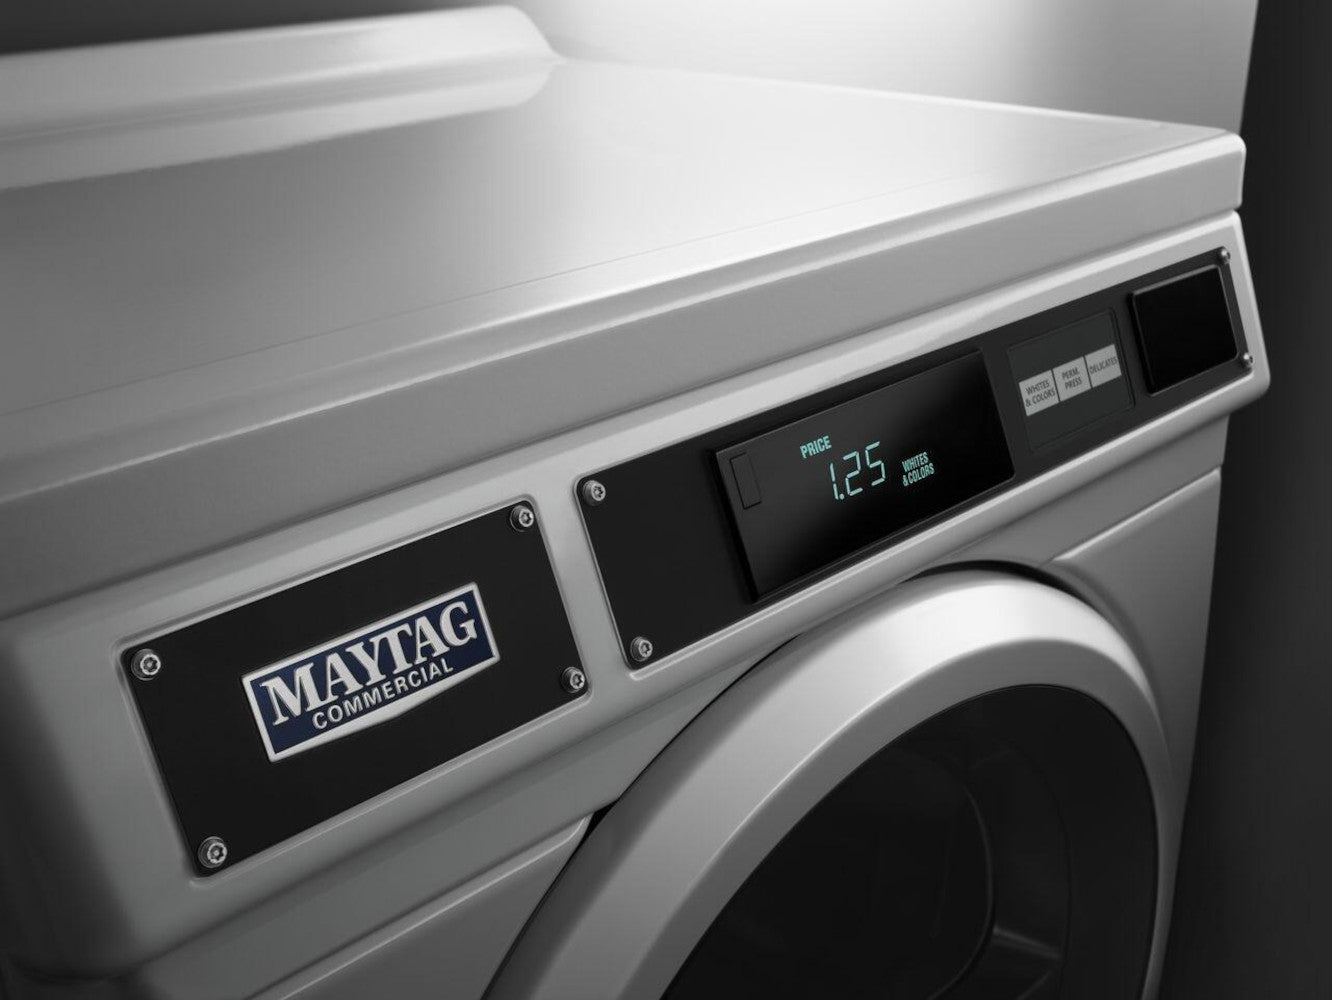 Maytag - 6.7 cu. Ft  Electric Dryer in White - MDE28PDCZW